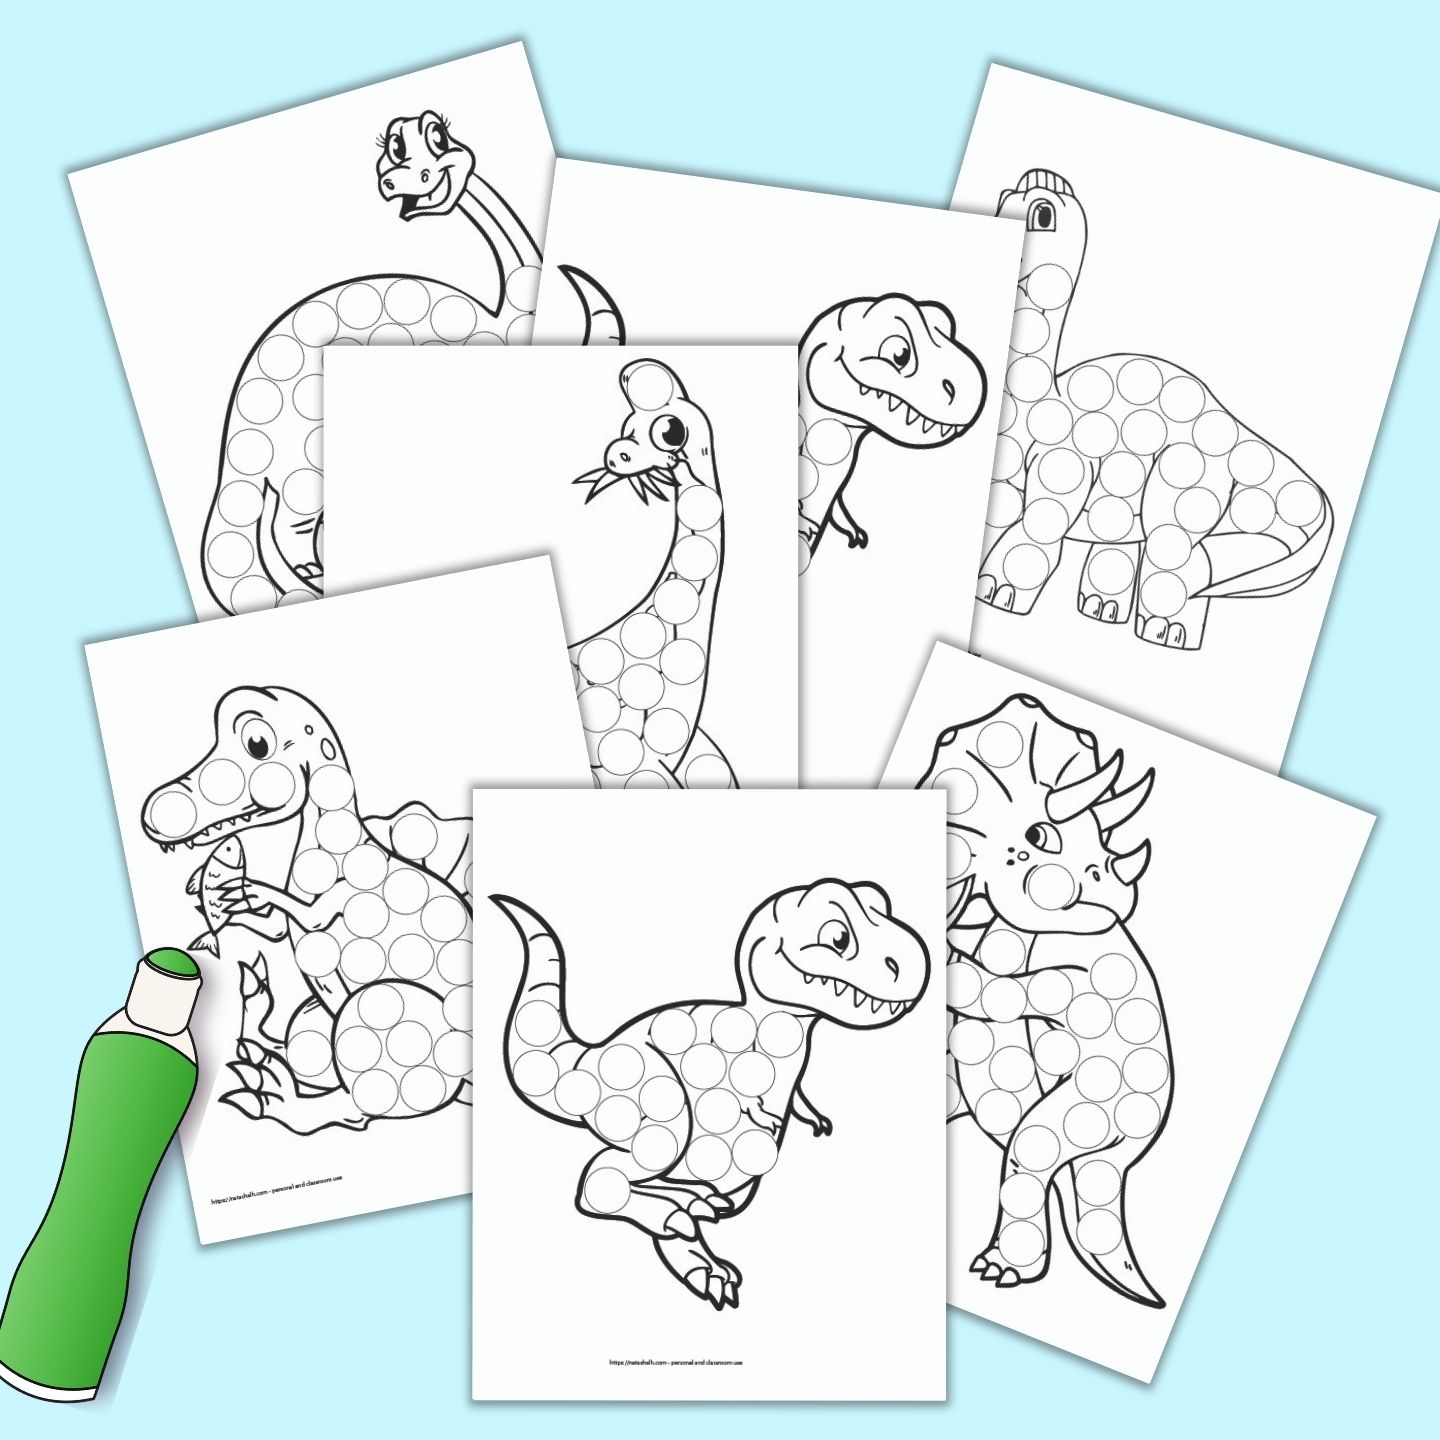 Dino-Dots: Fun and Easy Dot Marker Coloring Pages for Kids